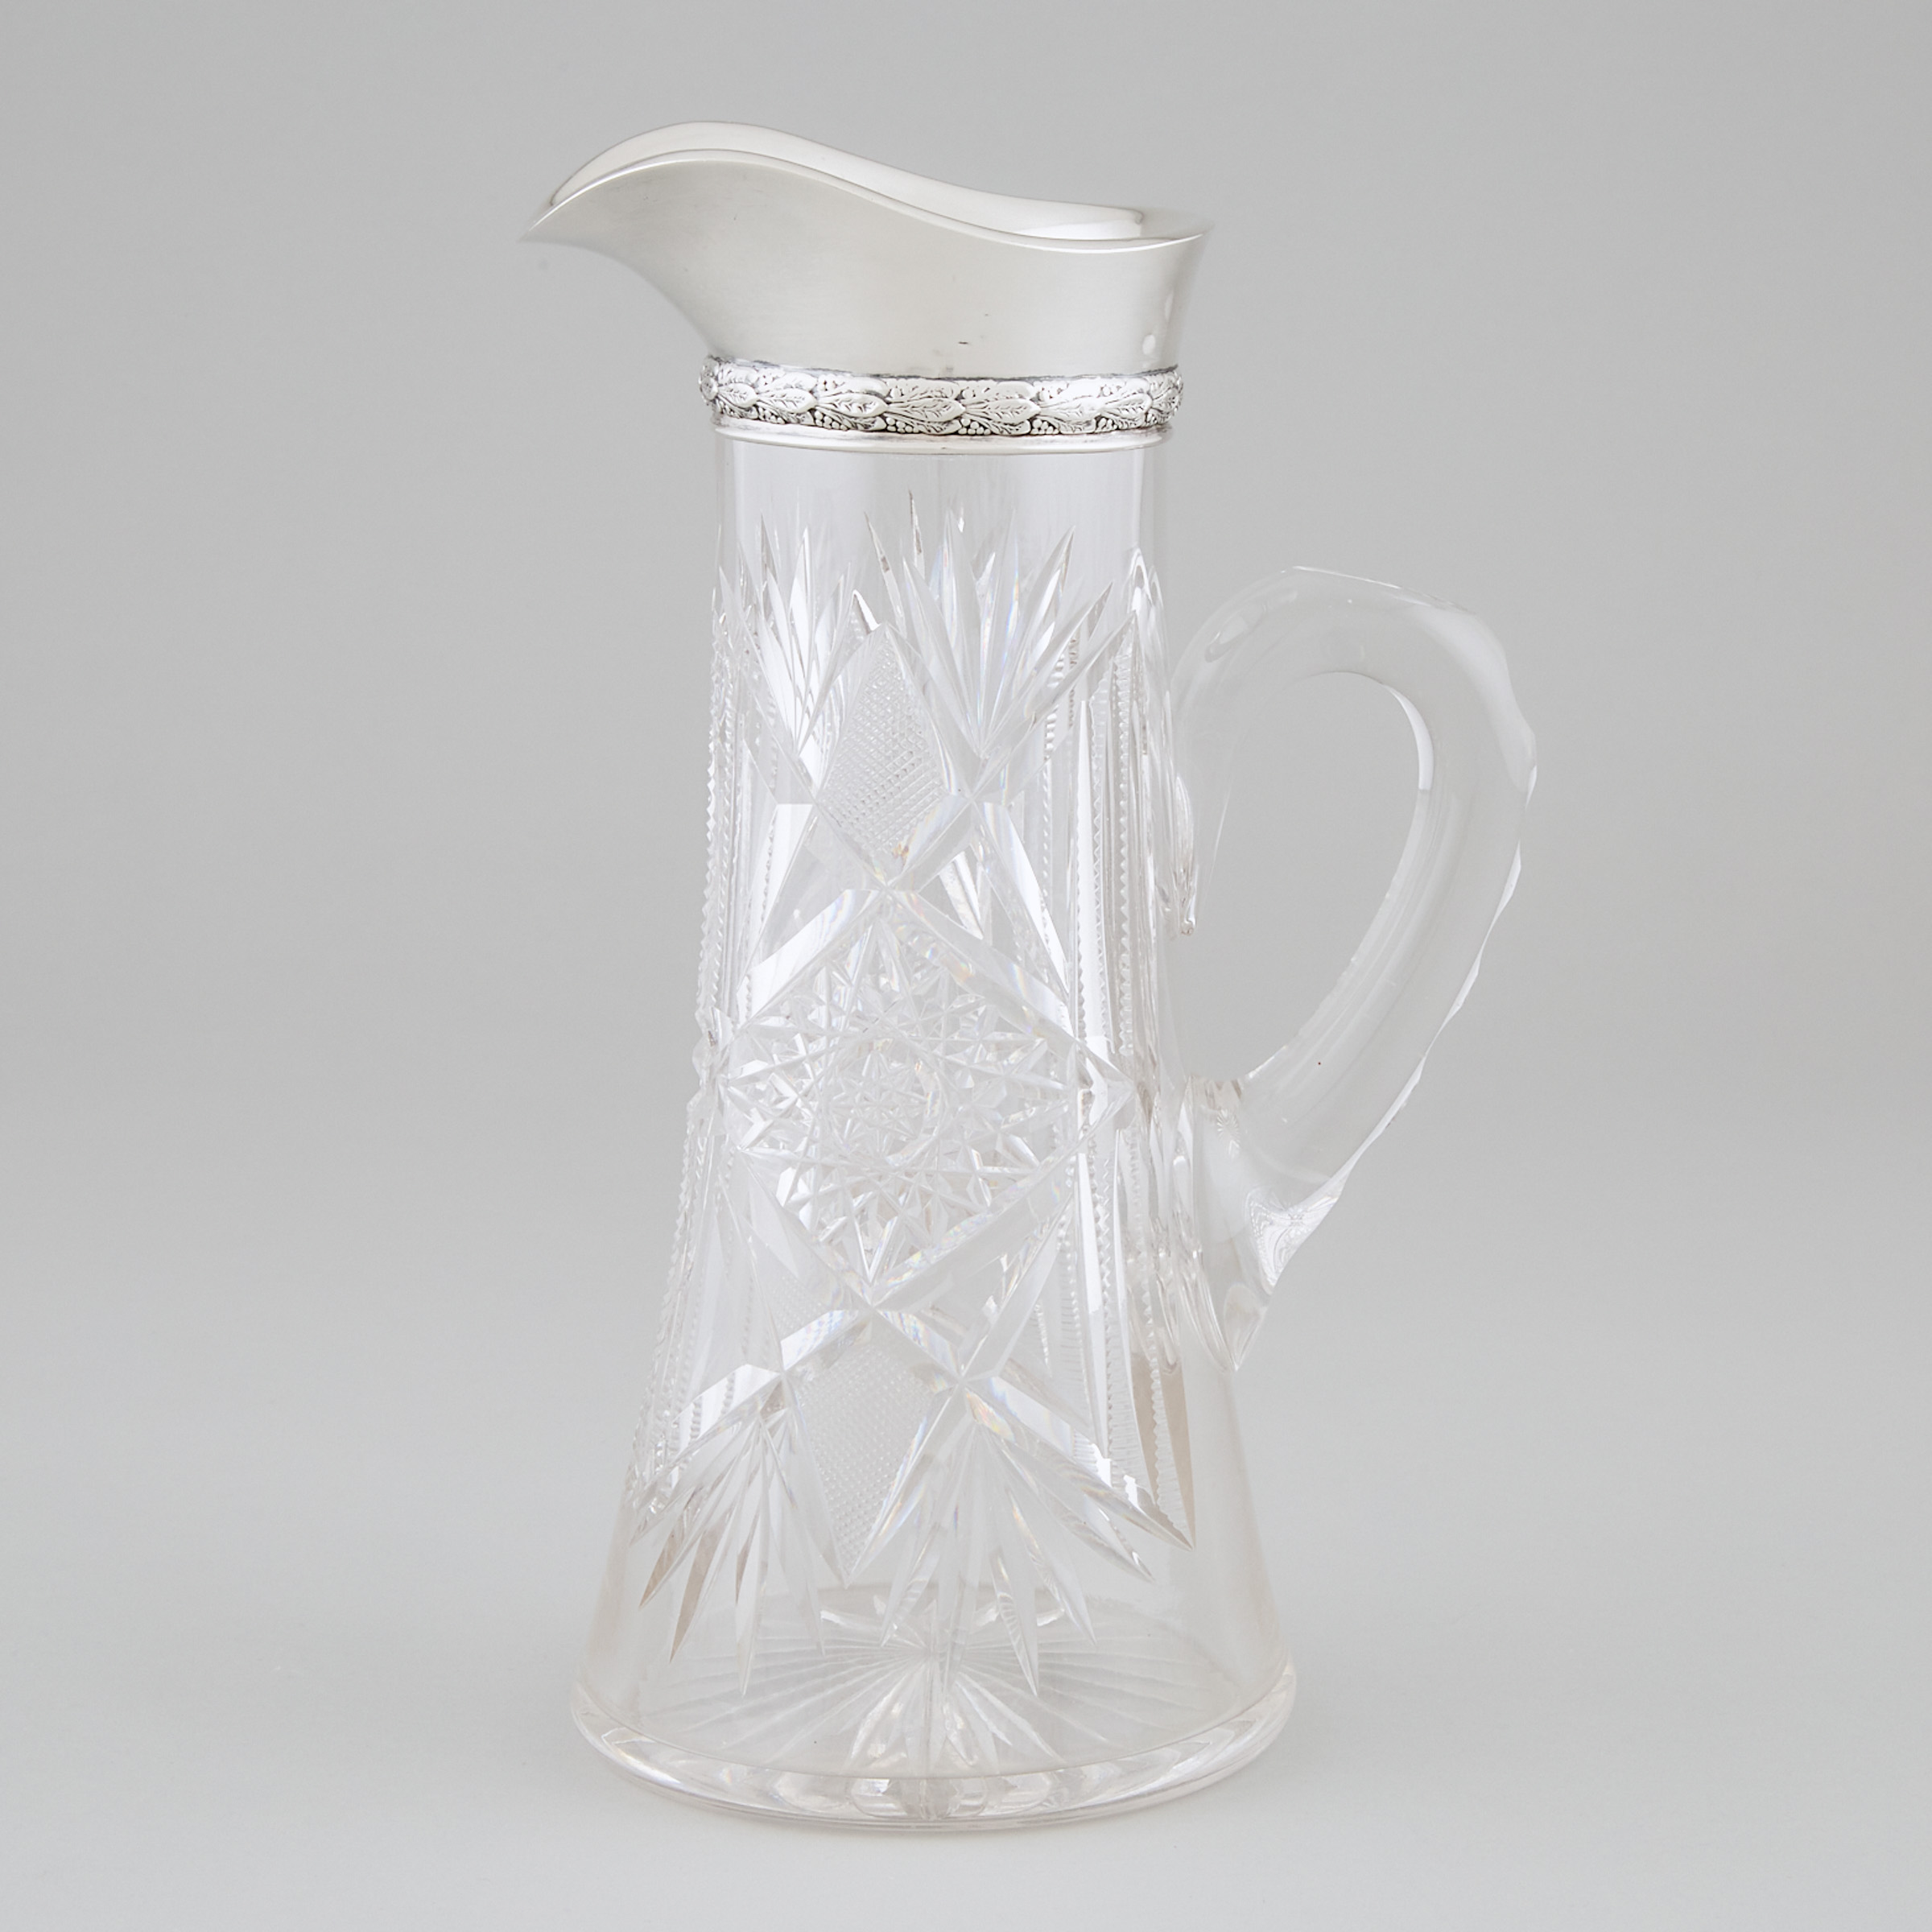 American Silver Mounted Cut Glass Water Jug, Gorham Mfg. Co., Providence, R.I., c.1906